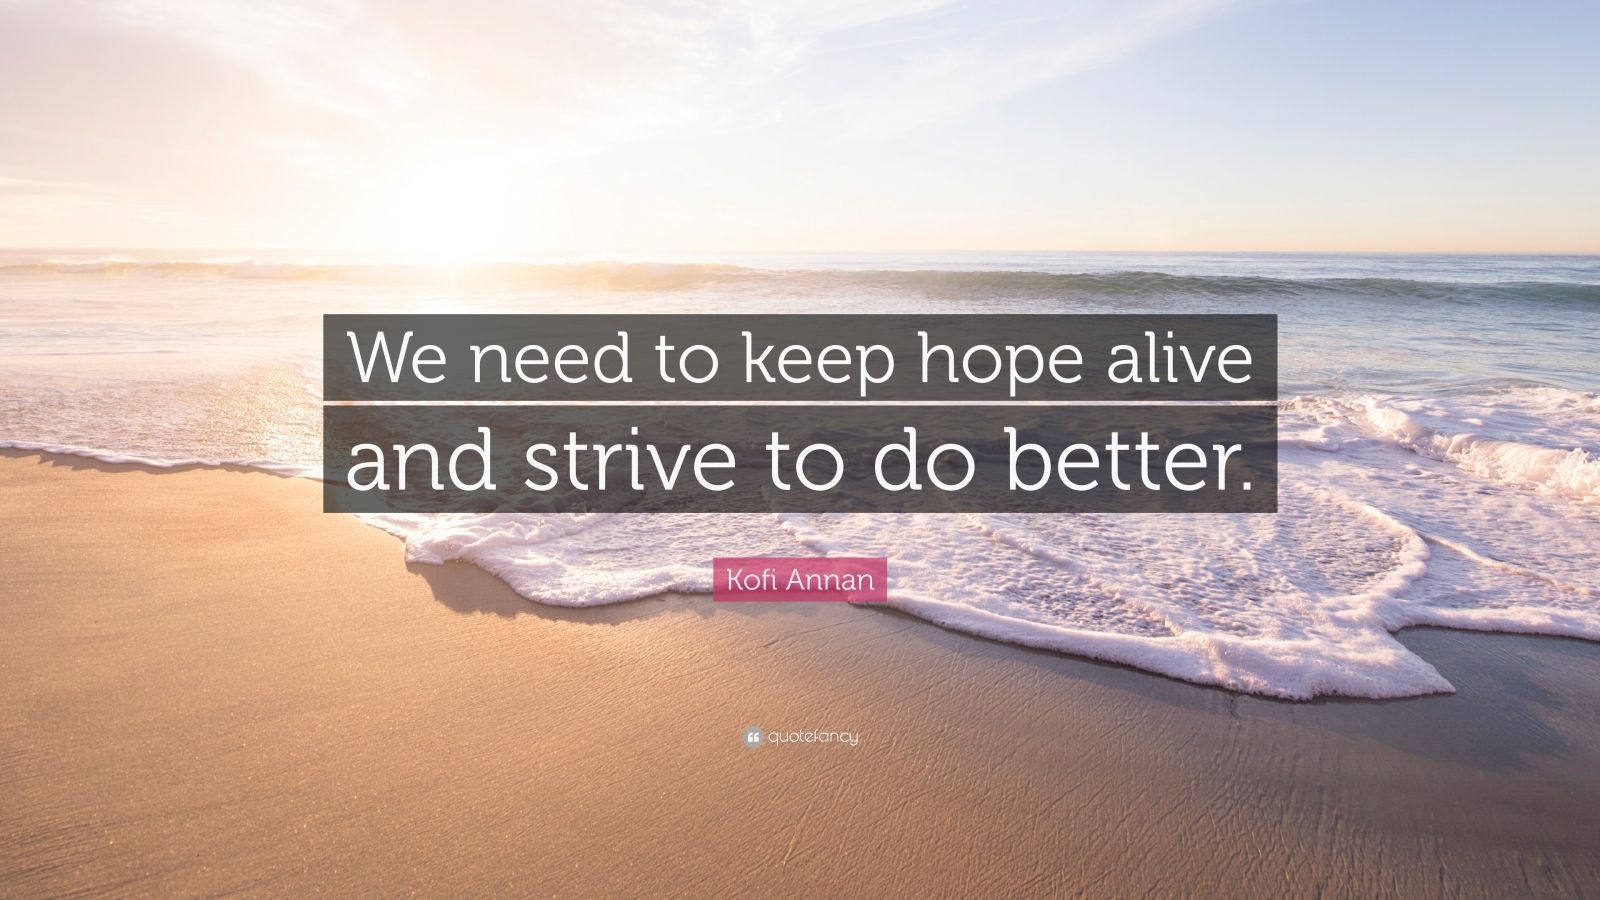 Kofi Annan Quote: "We need to keep hope alive and strive to do better." (7 wallpapers) - Quotefancy